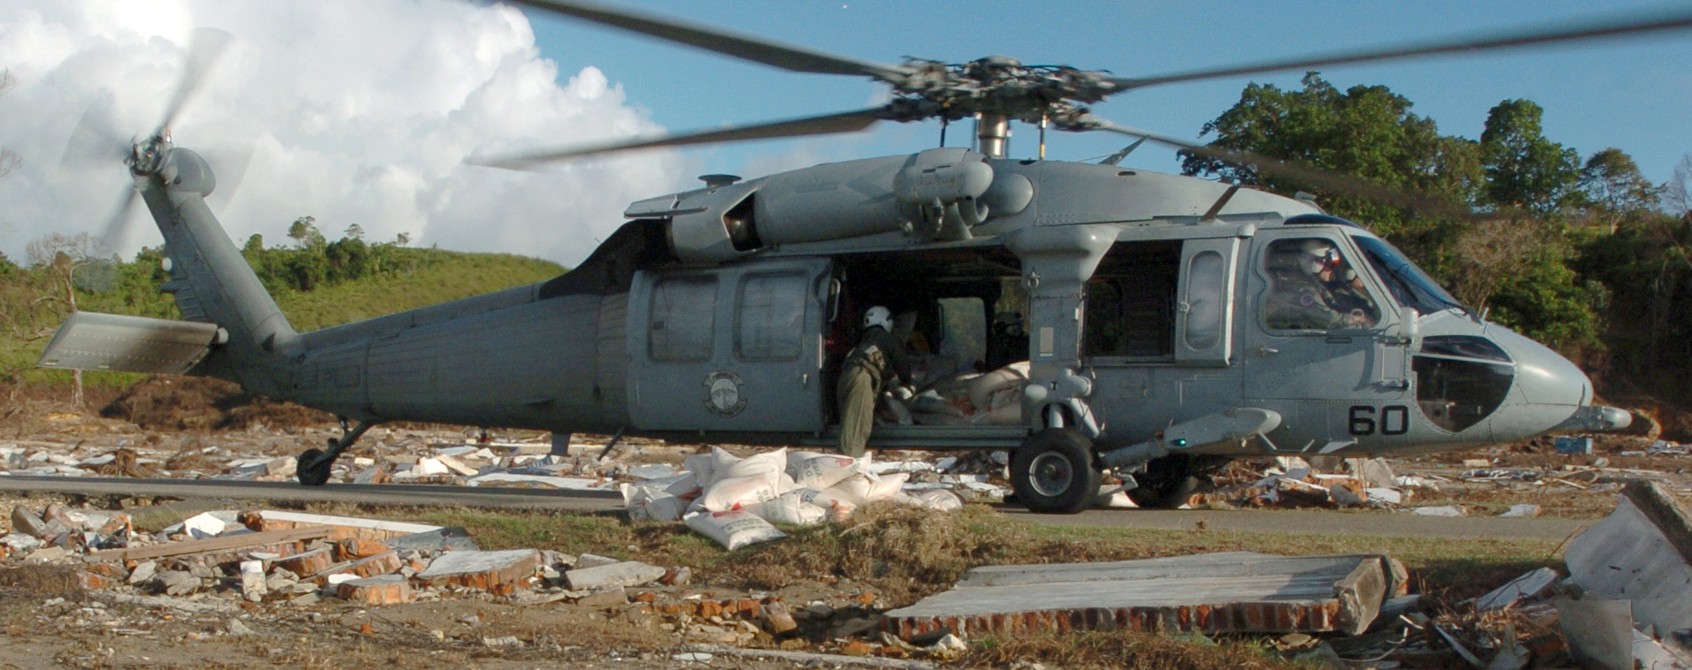 hc-5 providers helicopter combat support squadron navy mh-60s seahawk 12 sumatra indonesia